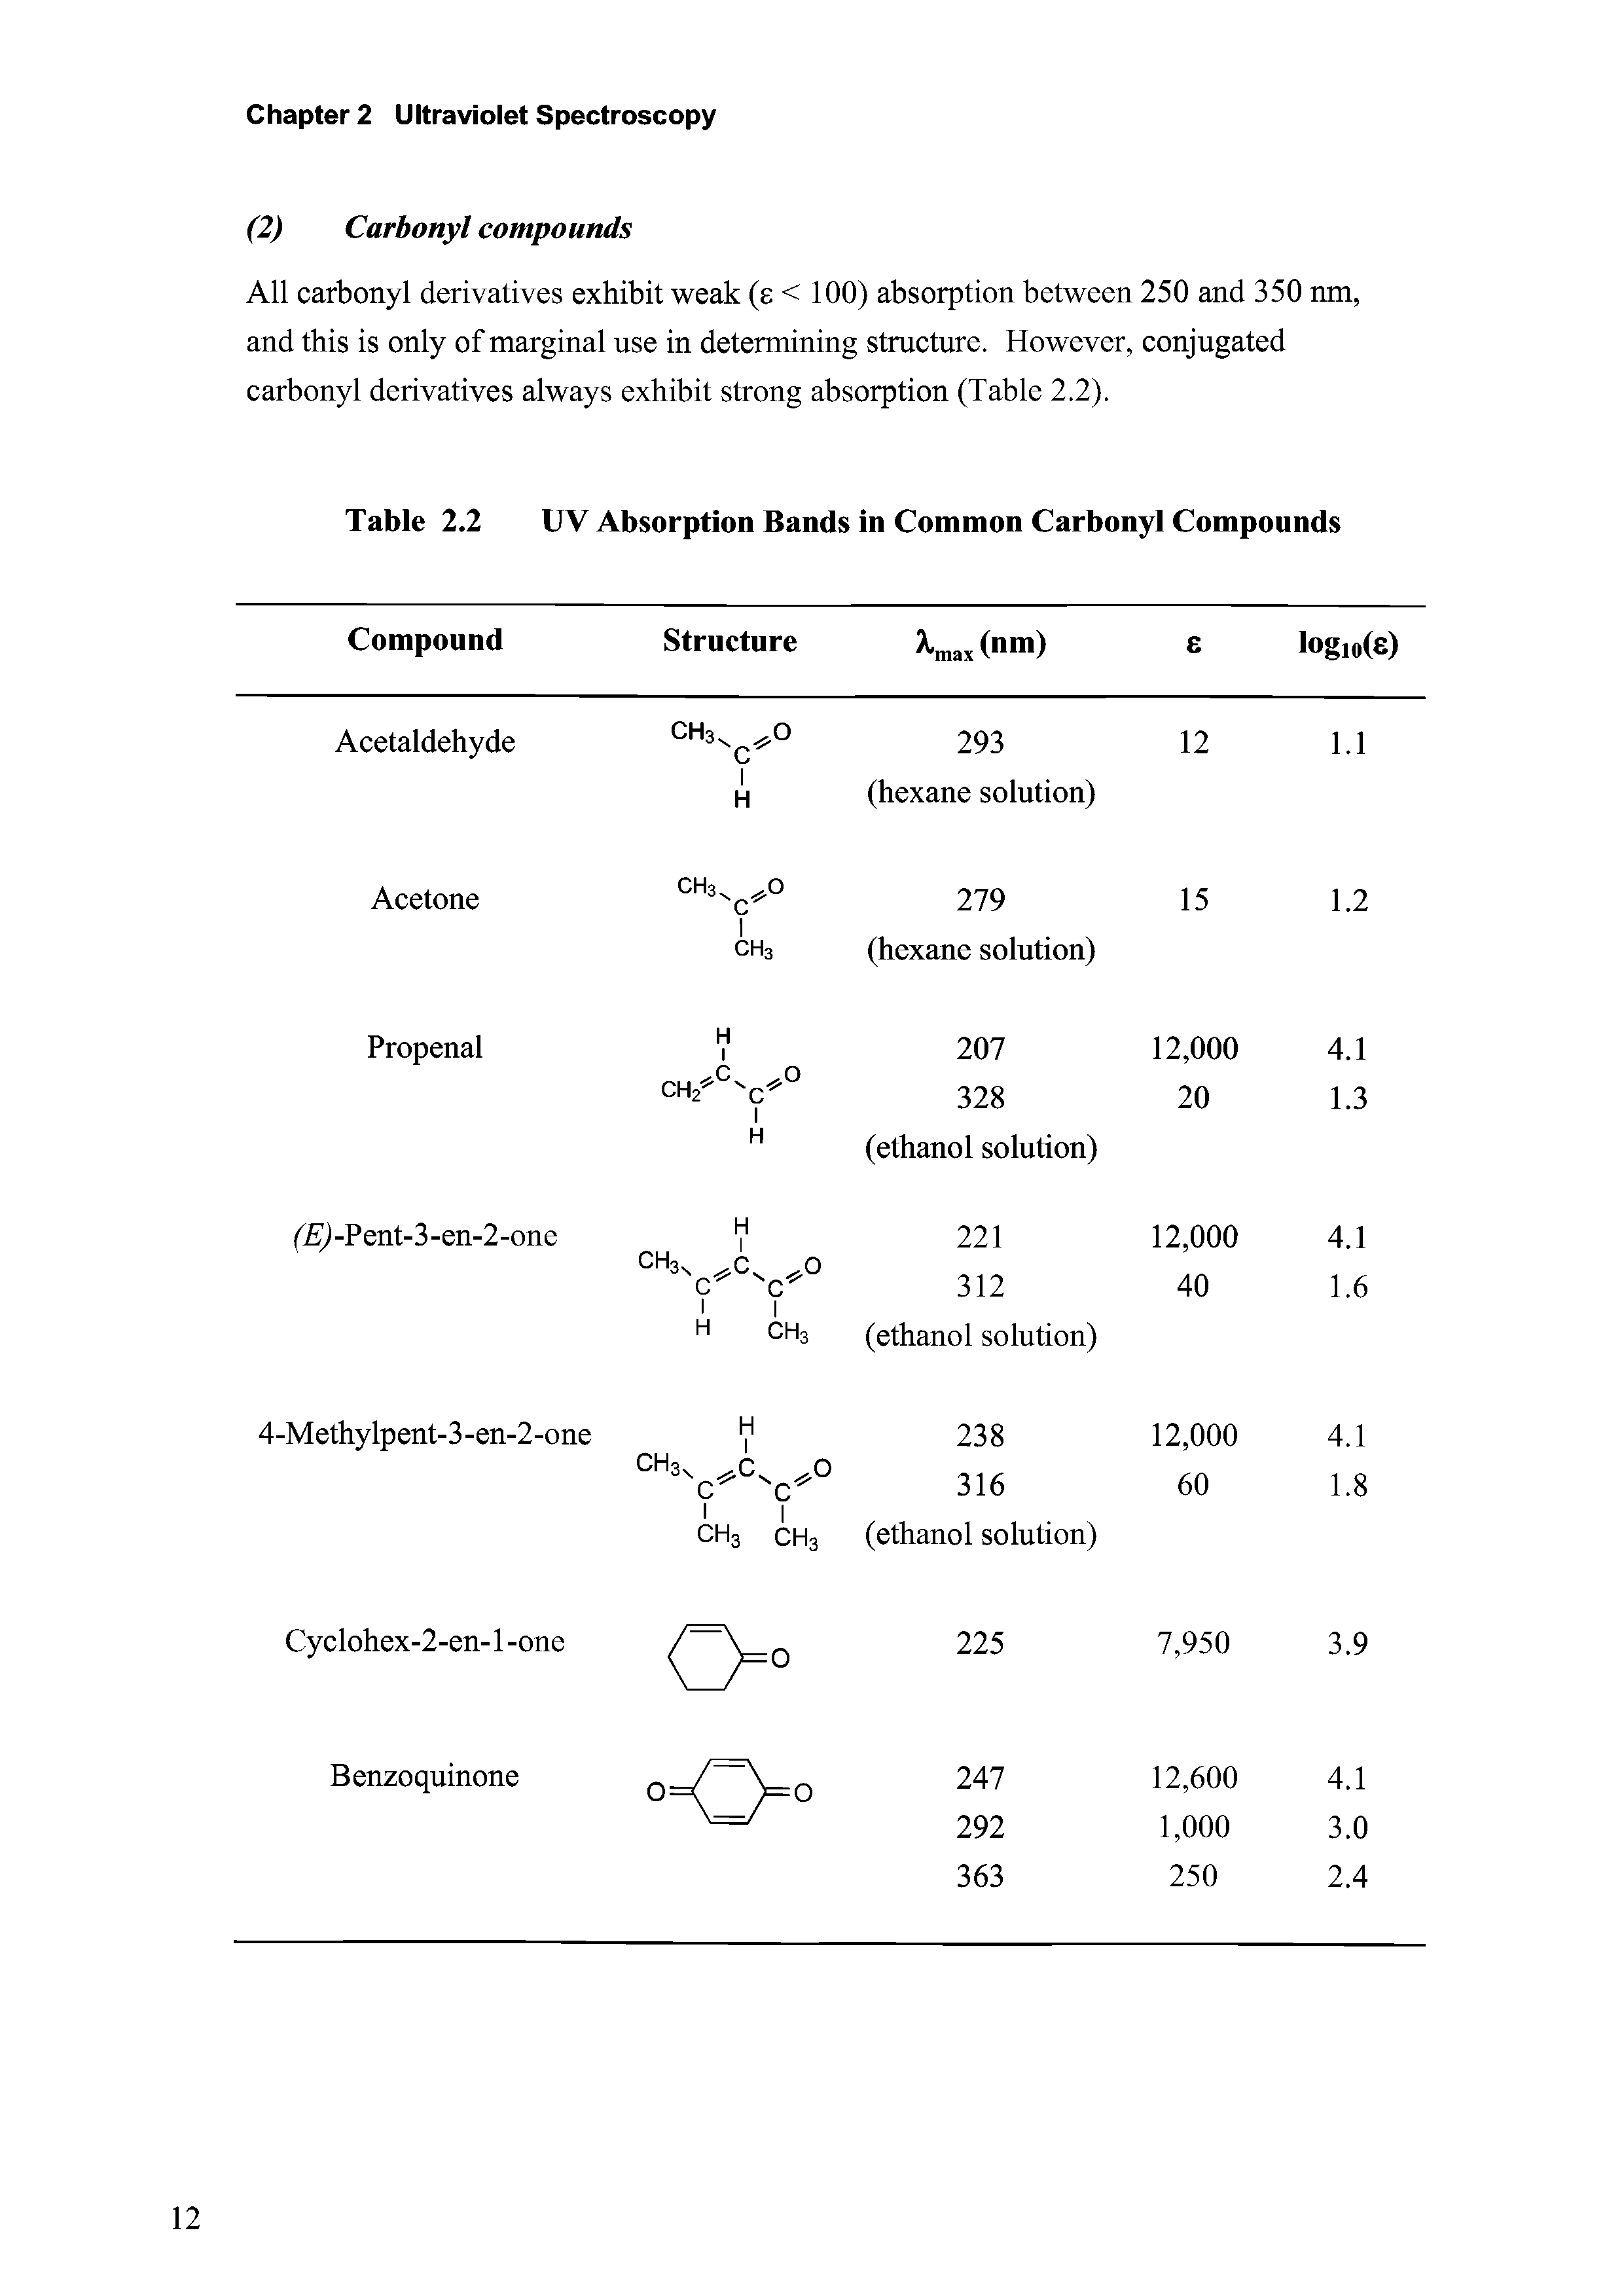 Table 2.2 UV Absorption Bands in Common Carbonyl Compounds...